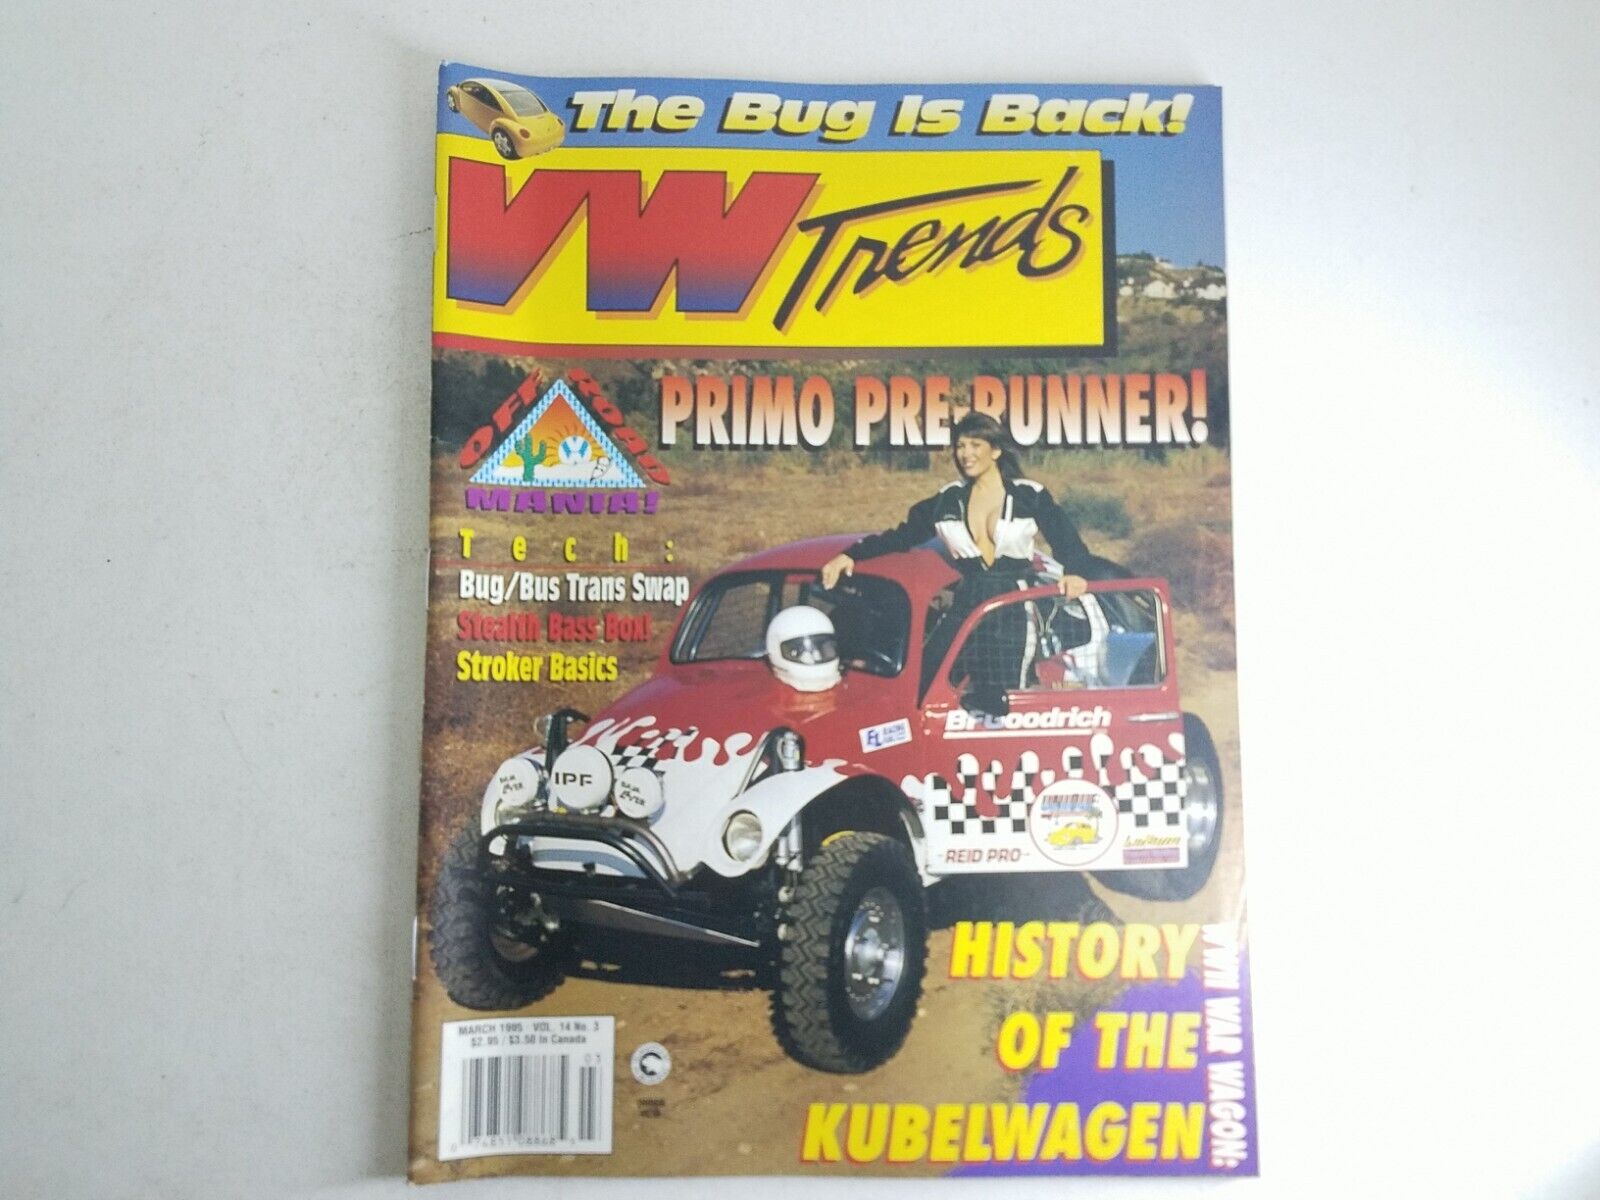 VW Trends Magazine March 1995 Thing